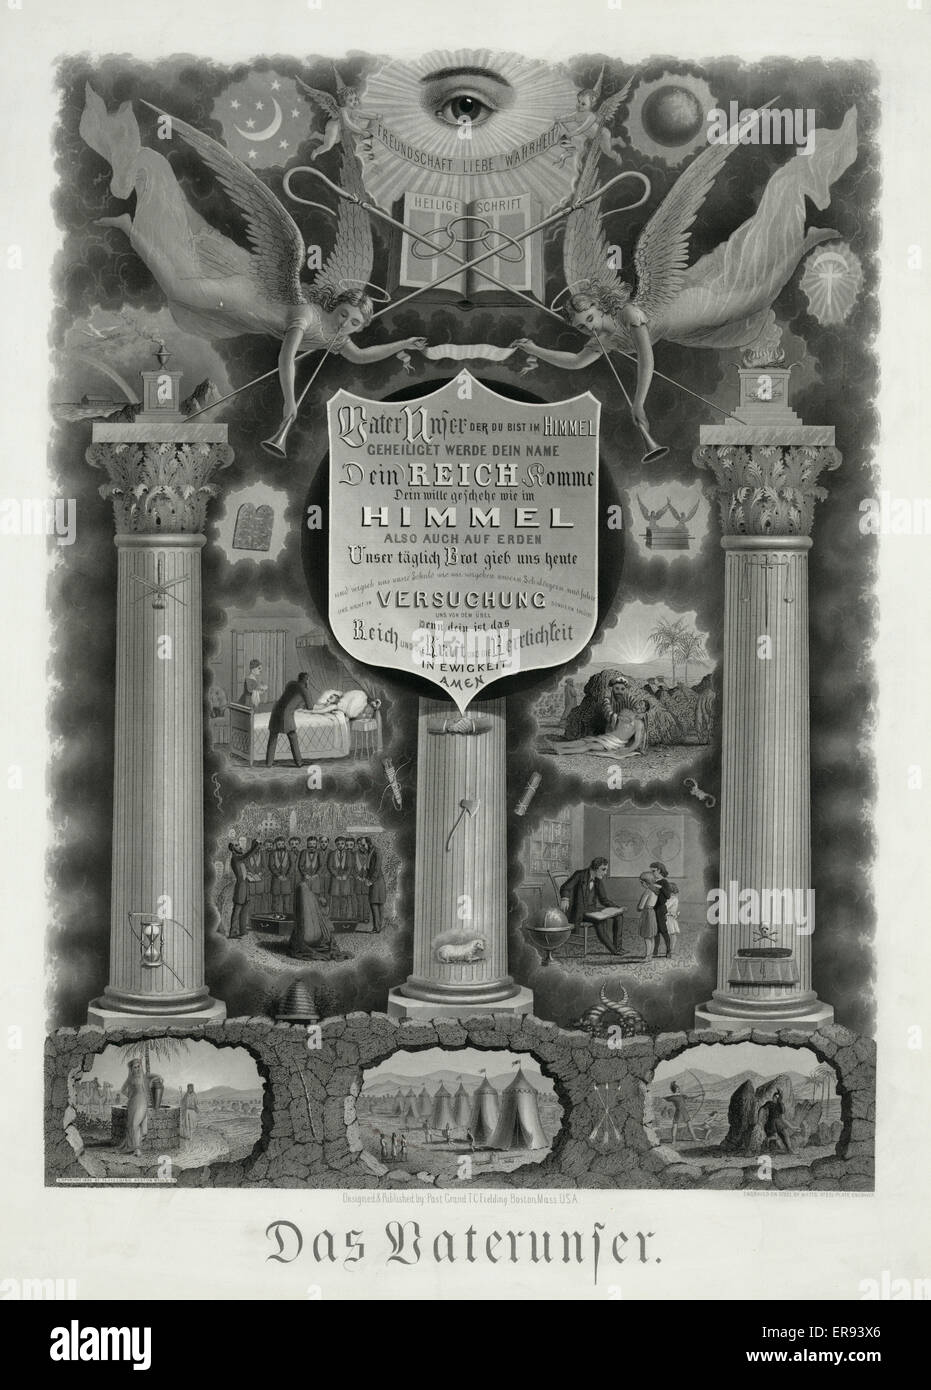 Das vaternuser. Print showing the Lord's Prayer in German on a shield at center with two angels blowing trumpets above and at top an eye and two putti holding a banner Freundschaft Liebe Wahrheit. Three columns with various symbols on them and biblical sc Stock Photo